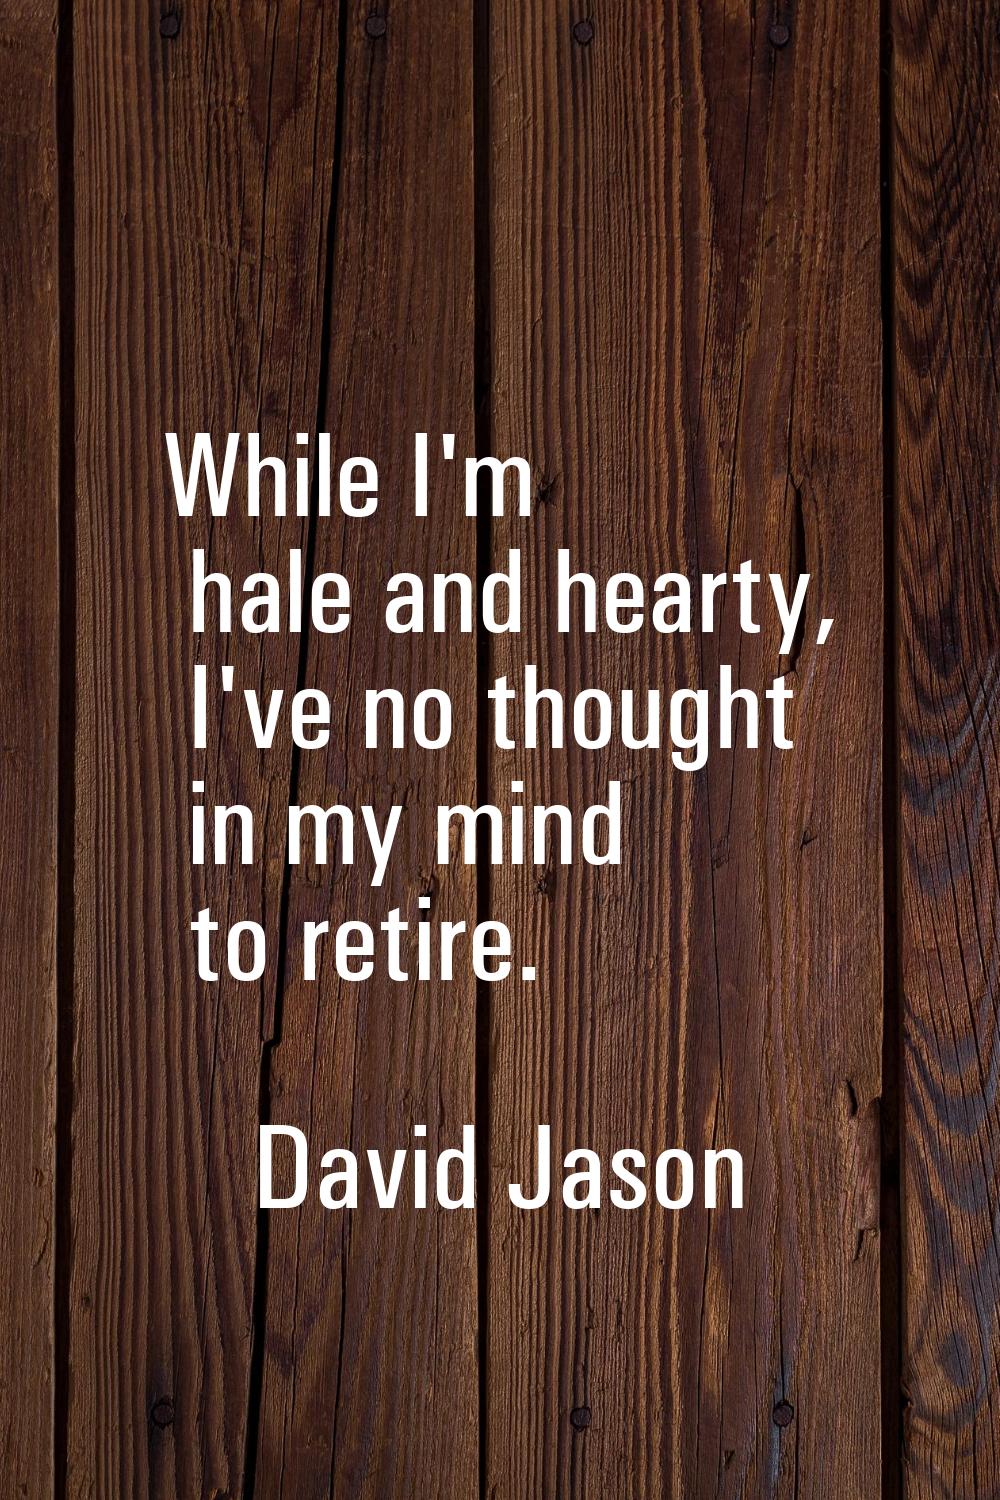 While I'm hale and hearty, I've no thought in my mind to retire.